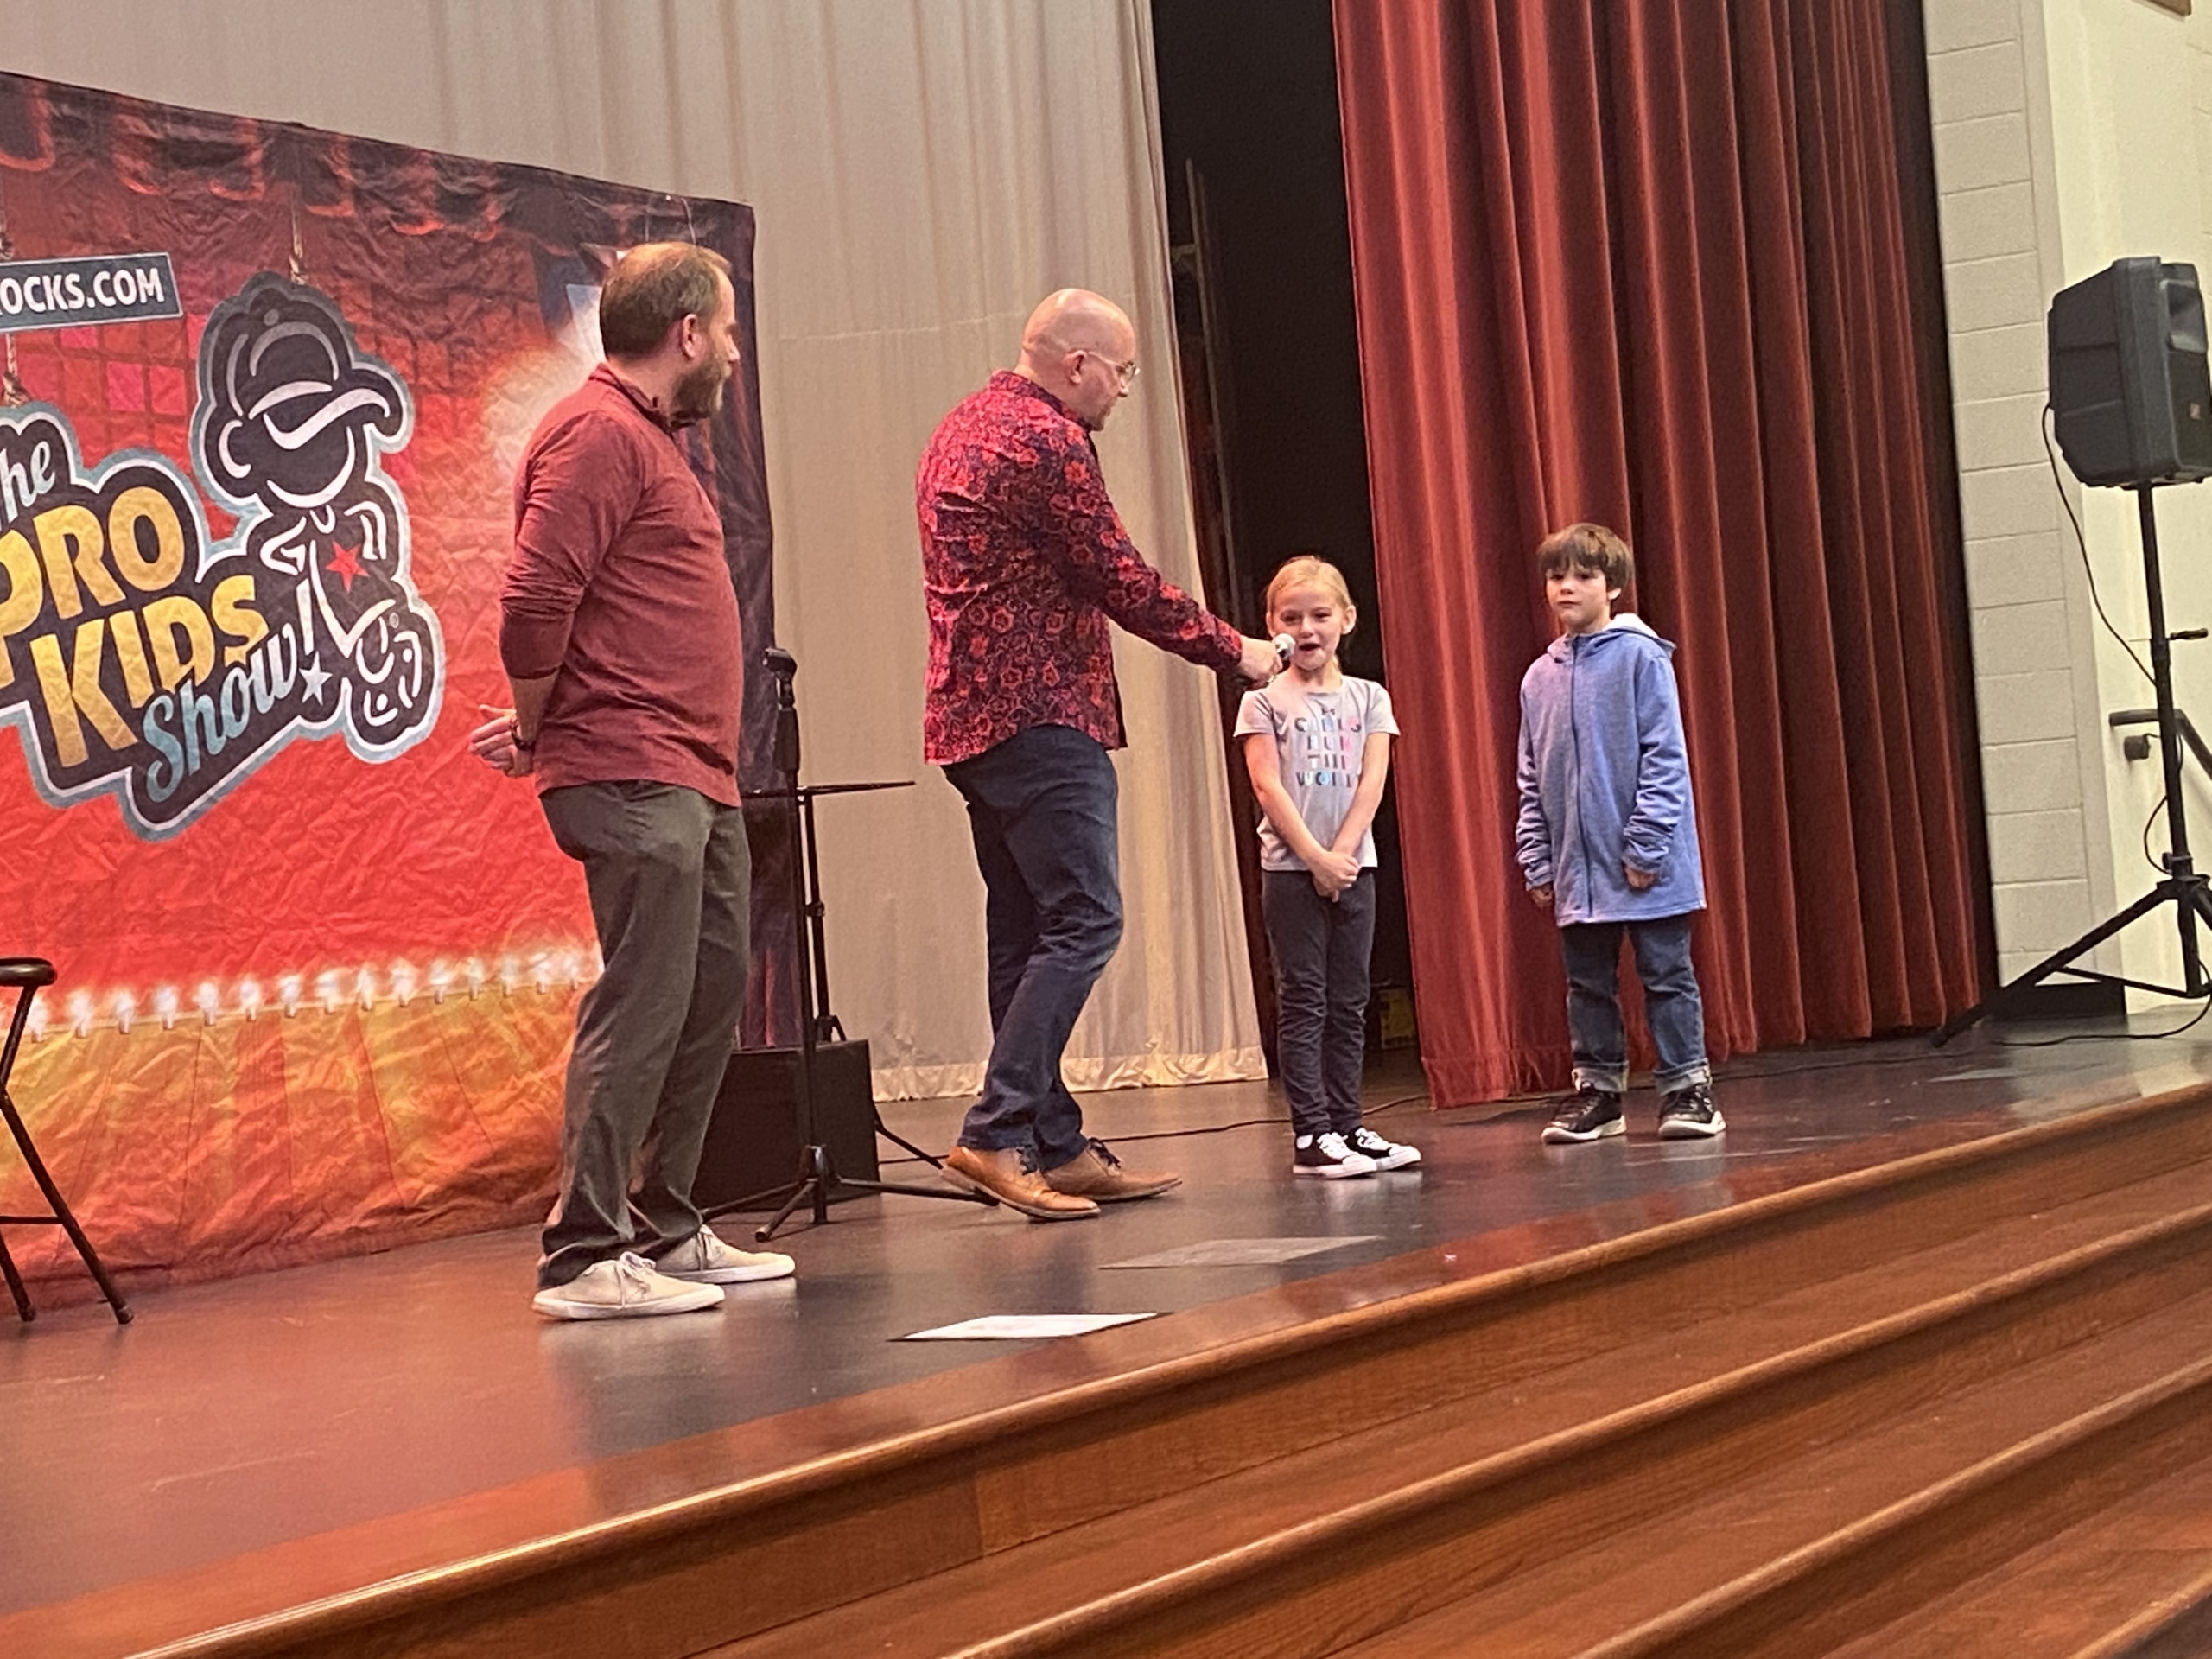 Prokids show held at Protsman Elementary School in October. It was such fun! There were day performances for the student body and an evening show for our families.